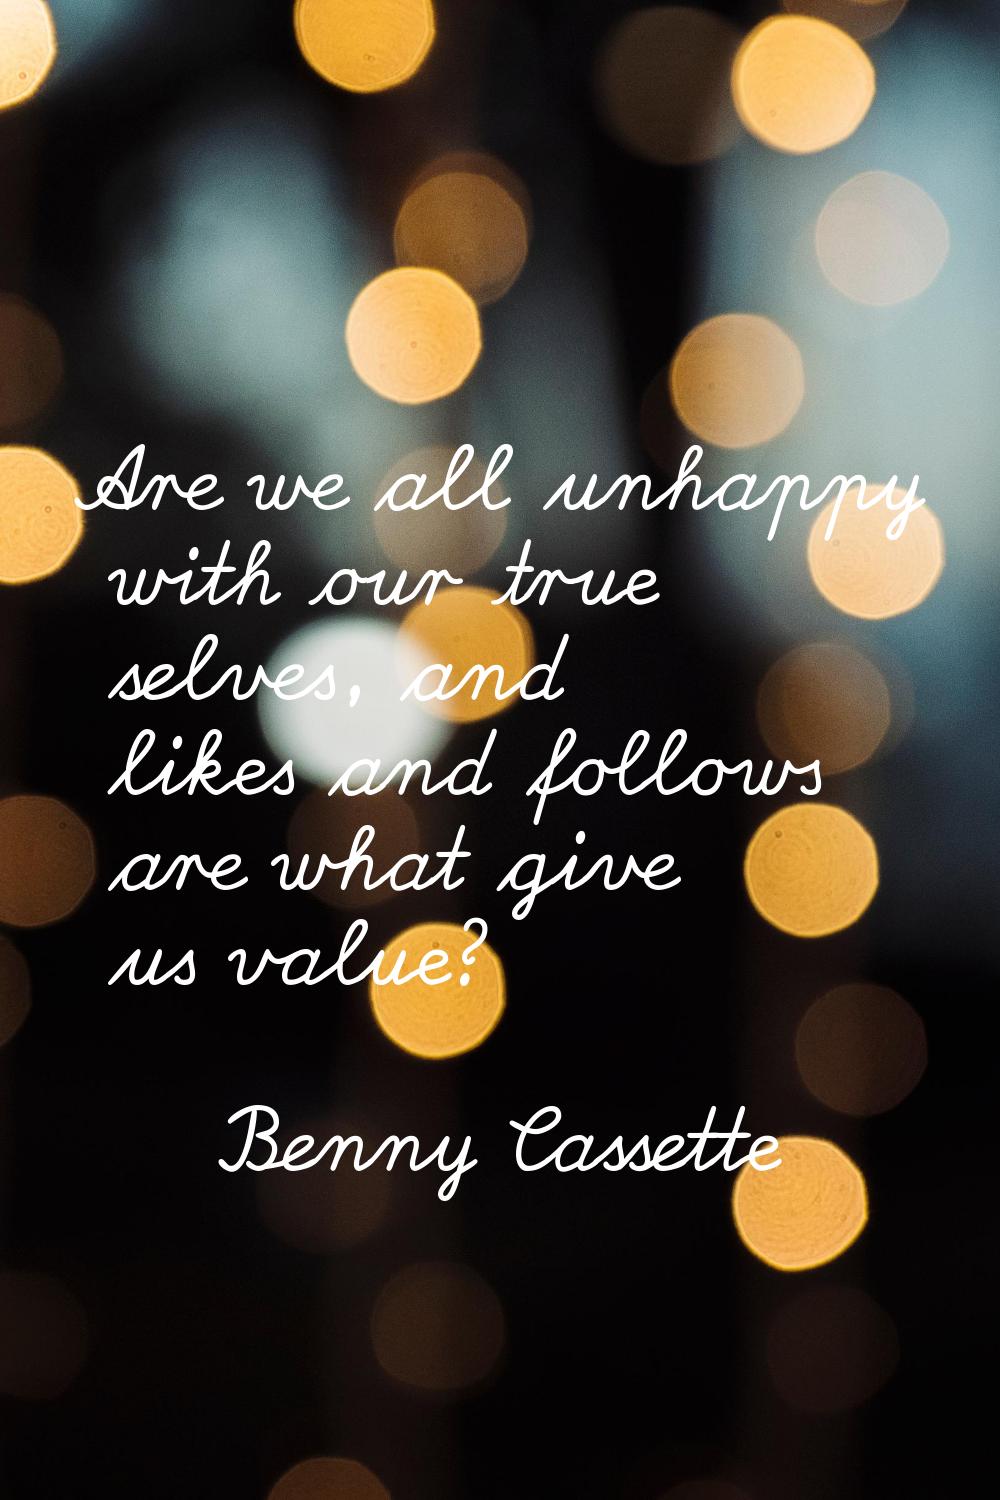 Are we all unhappy with our true selves, and likes and follows are what give us value?